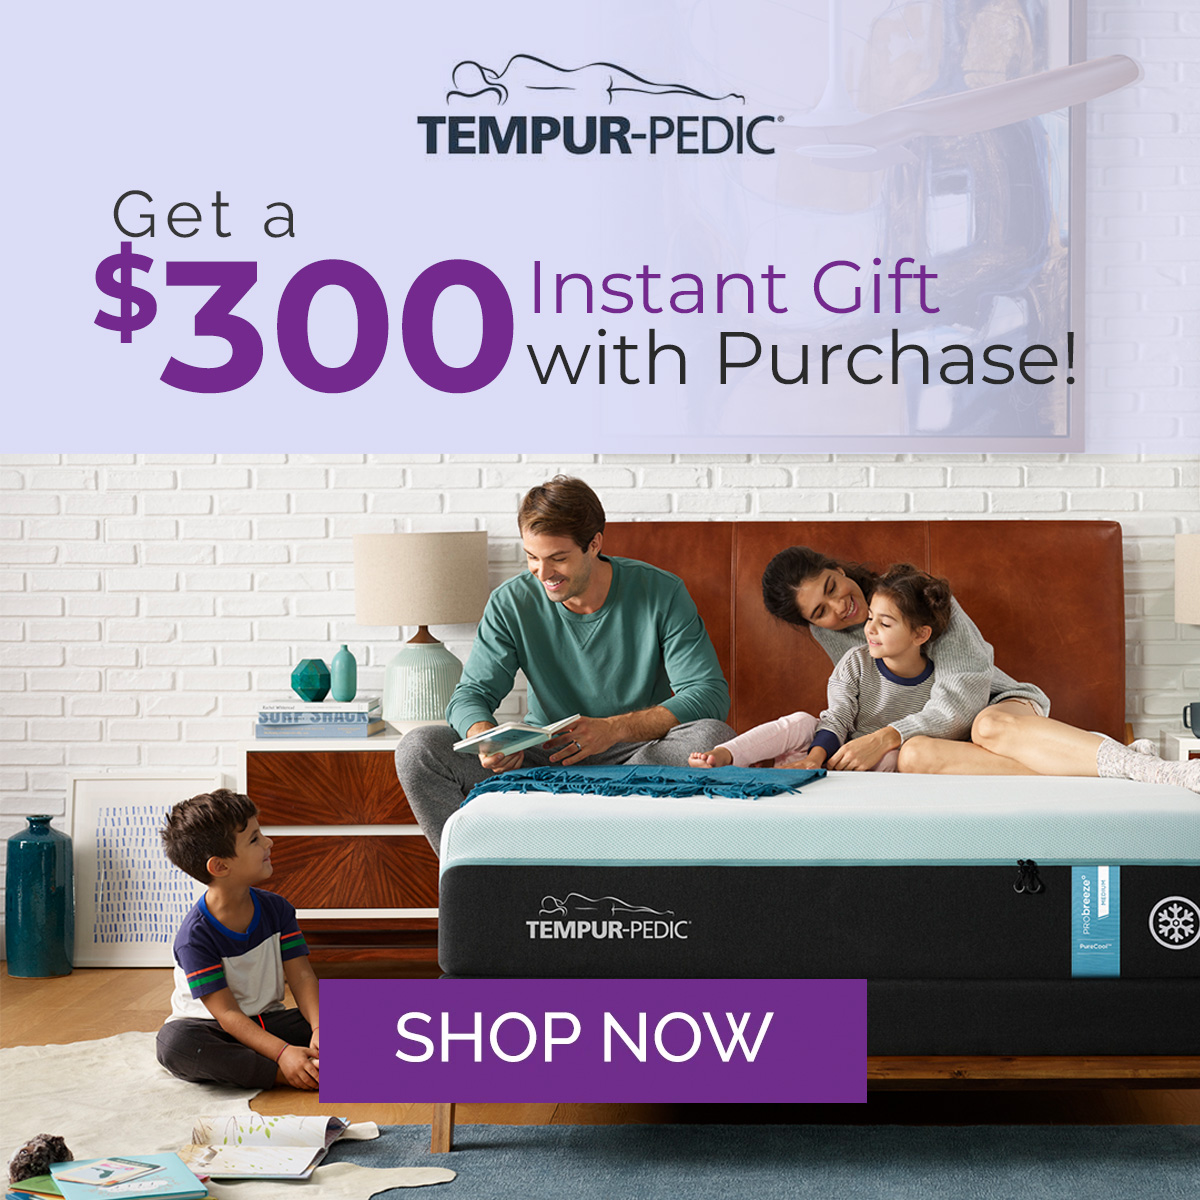 Tempur-Pedic $300 Gift with Purchase